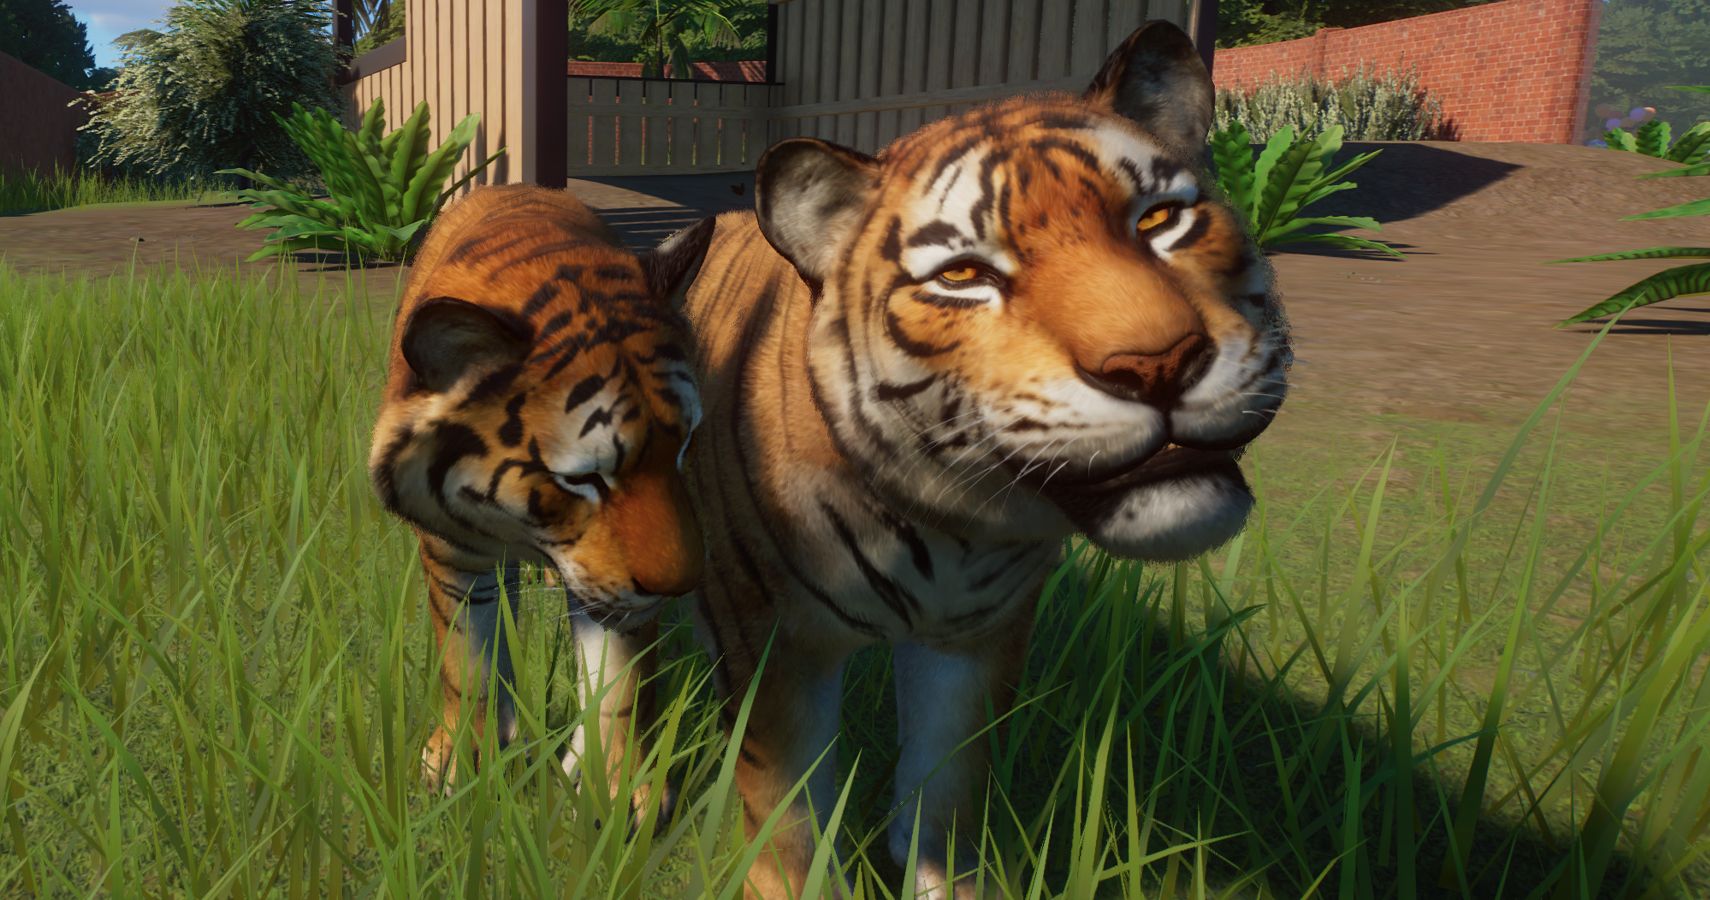 how to research planet zoo